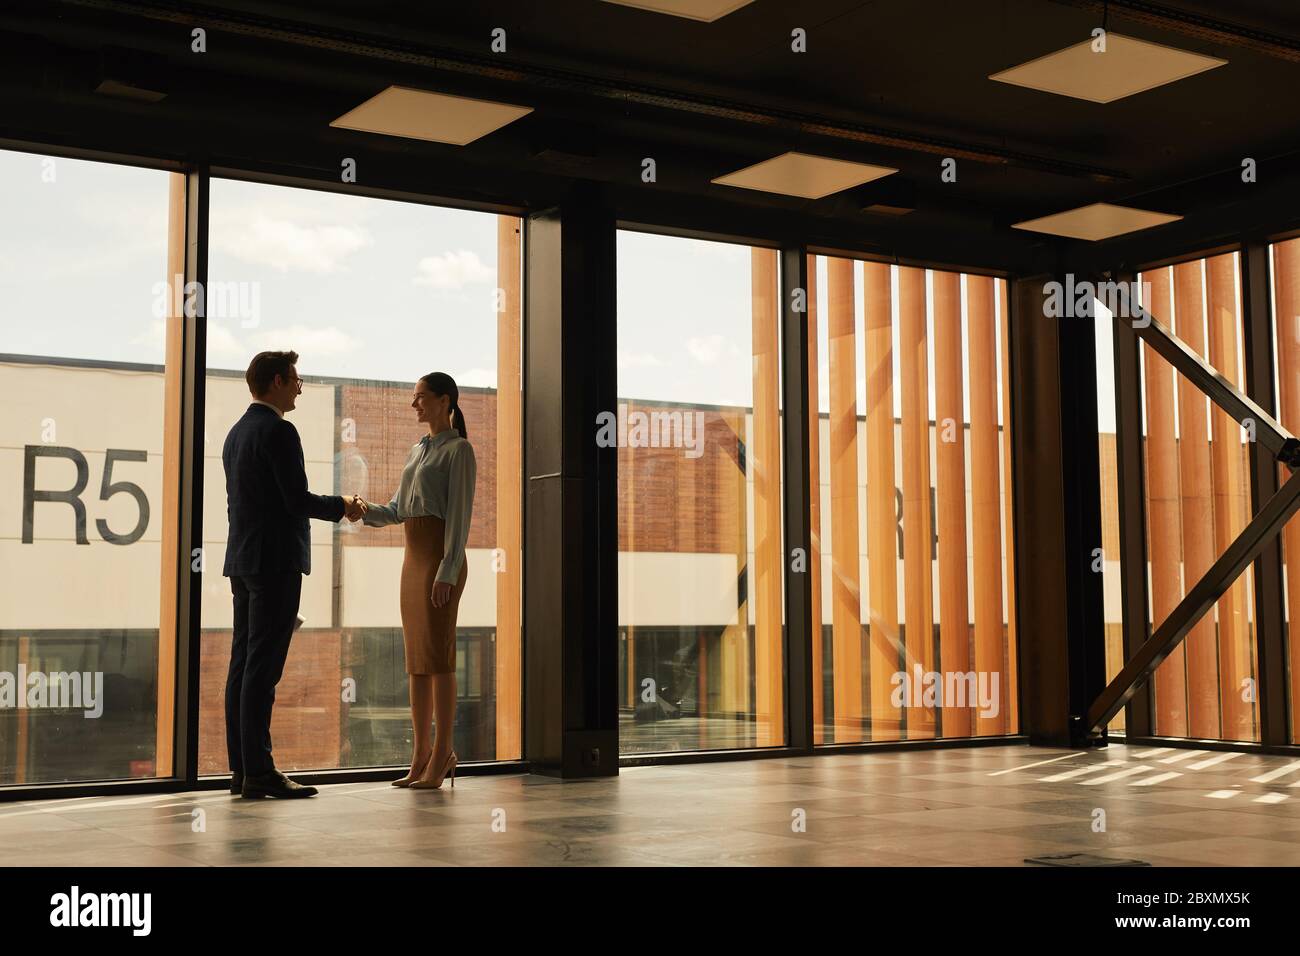 Wide angle view of real estate agent shaking hands with client while standing in empty office building interior lit by sunlight, copy space Stock Photo